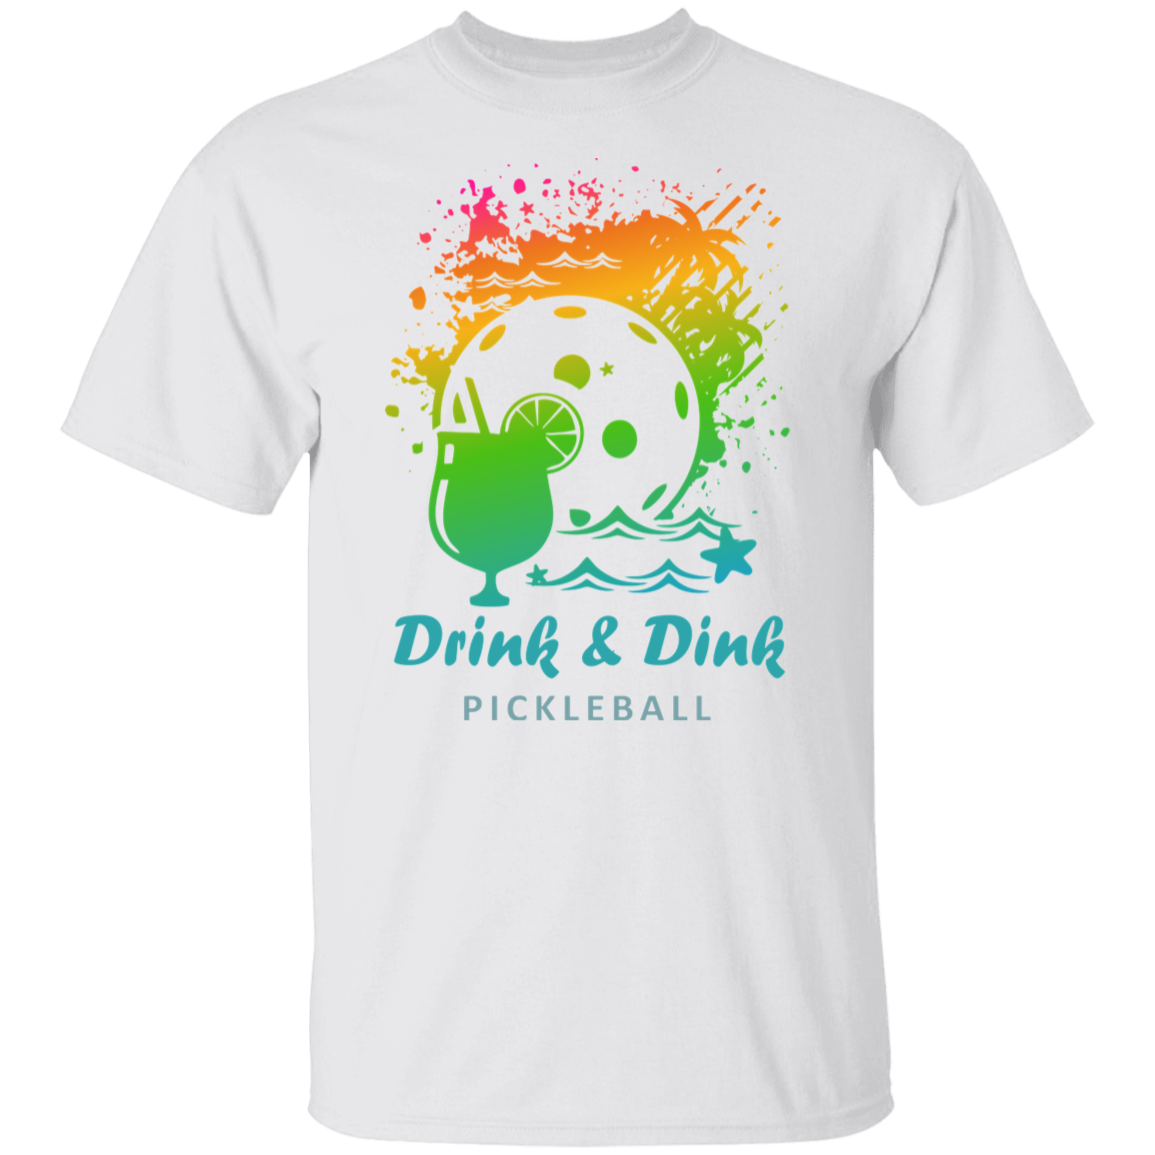 Drink and Dink Pickleball T-Shirt